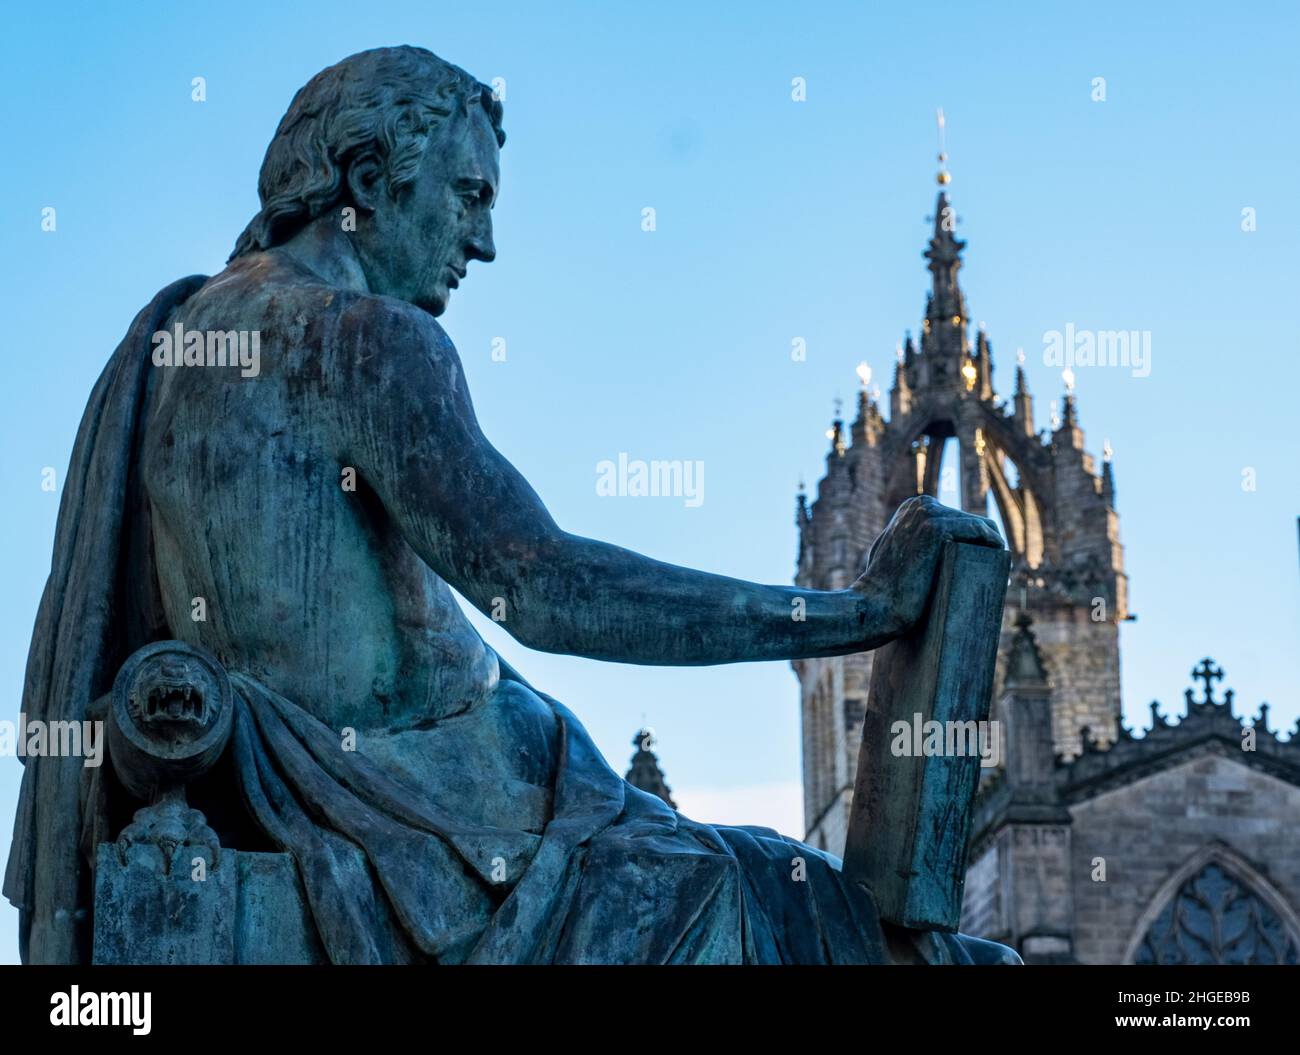 David Hume statue located on the Royal Mile, Edinburgh. Hume was a  Scottish Enlightenment philosopher, historian, economist, librarian and essayist. Stock Photo